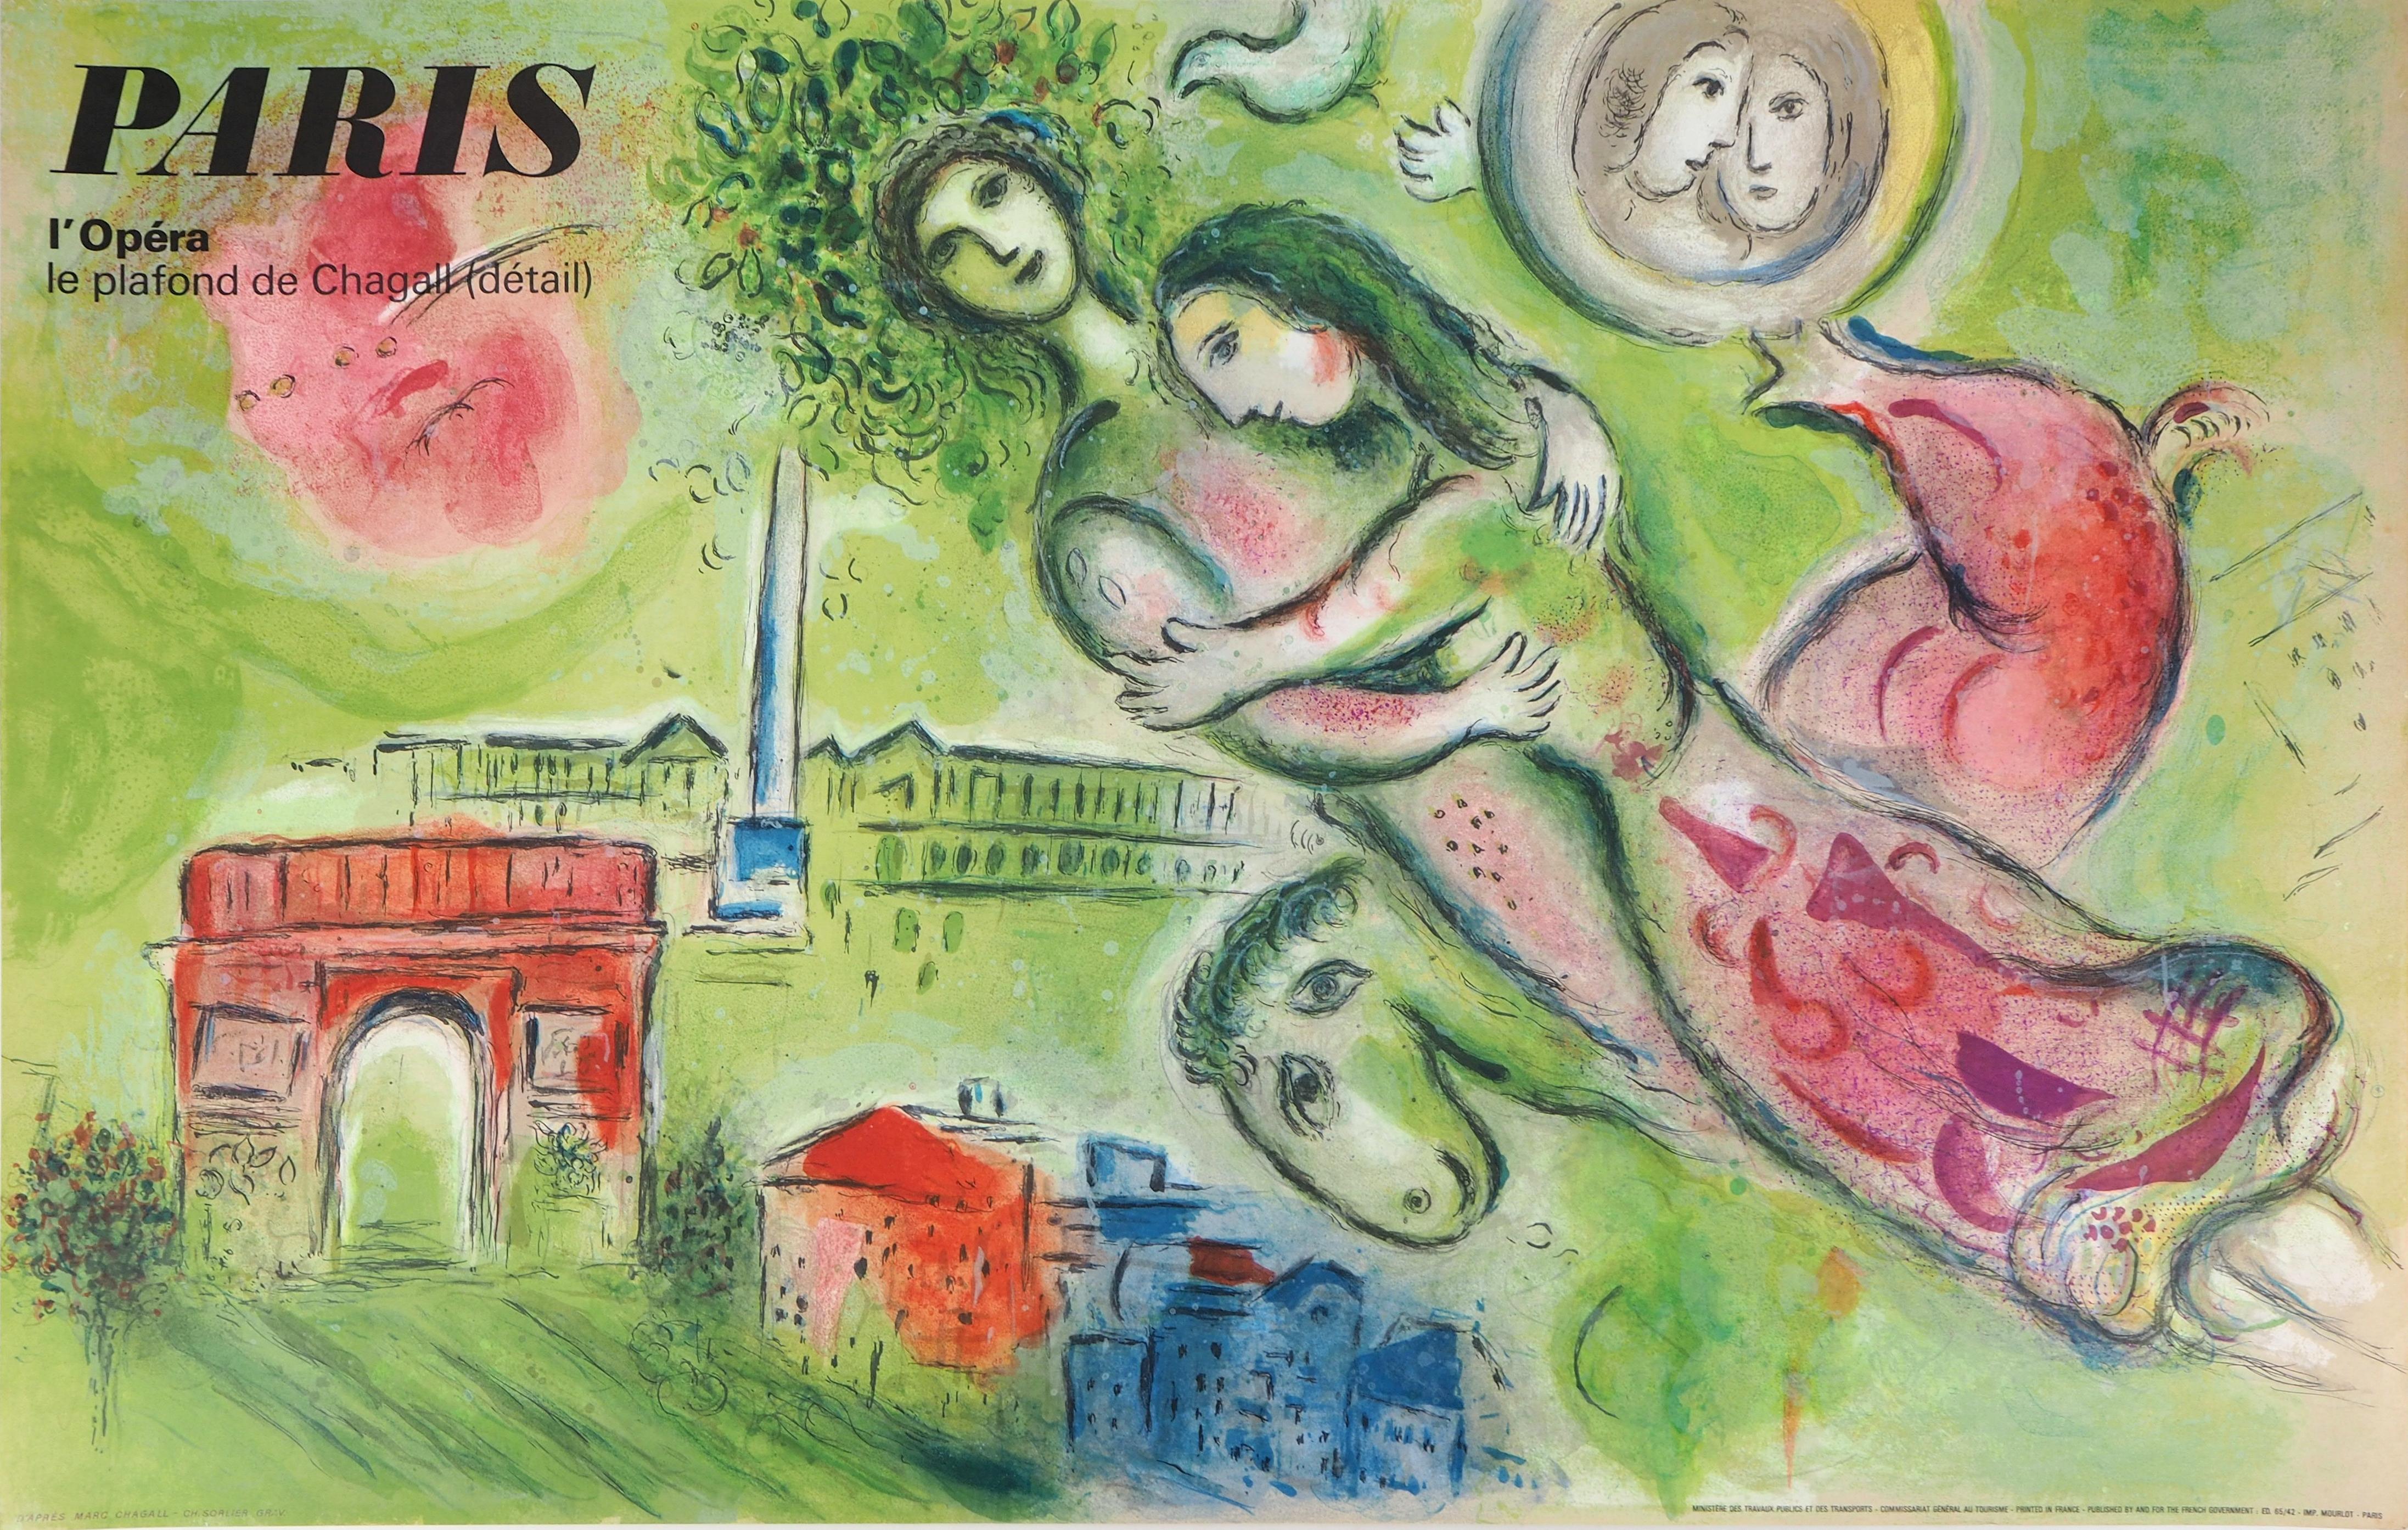 (after) Marc Chagall Figurative Print - Romeo and Juliet (Paris Opera) - Lithograph, Mourlot 1965